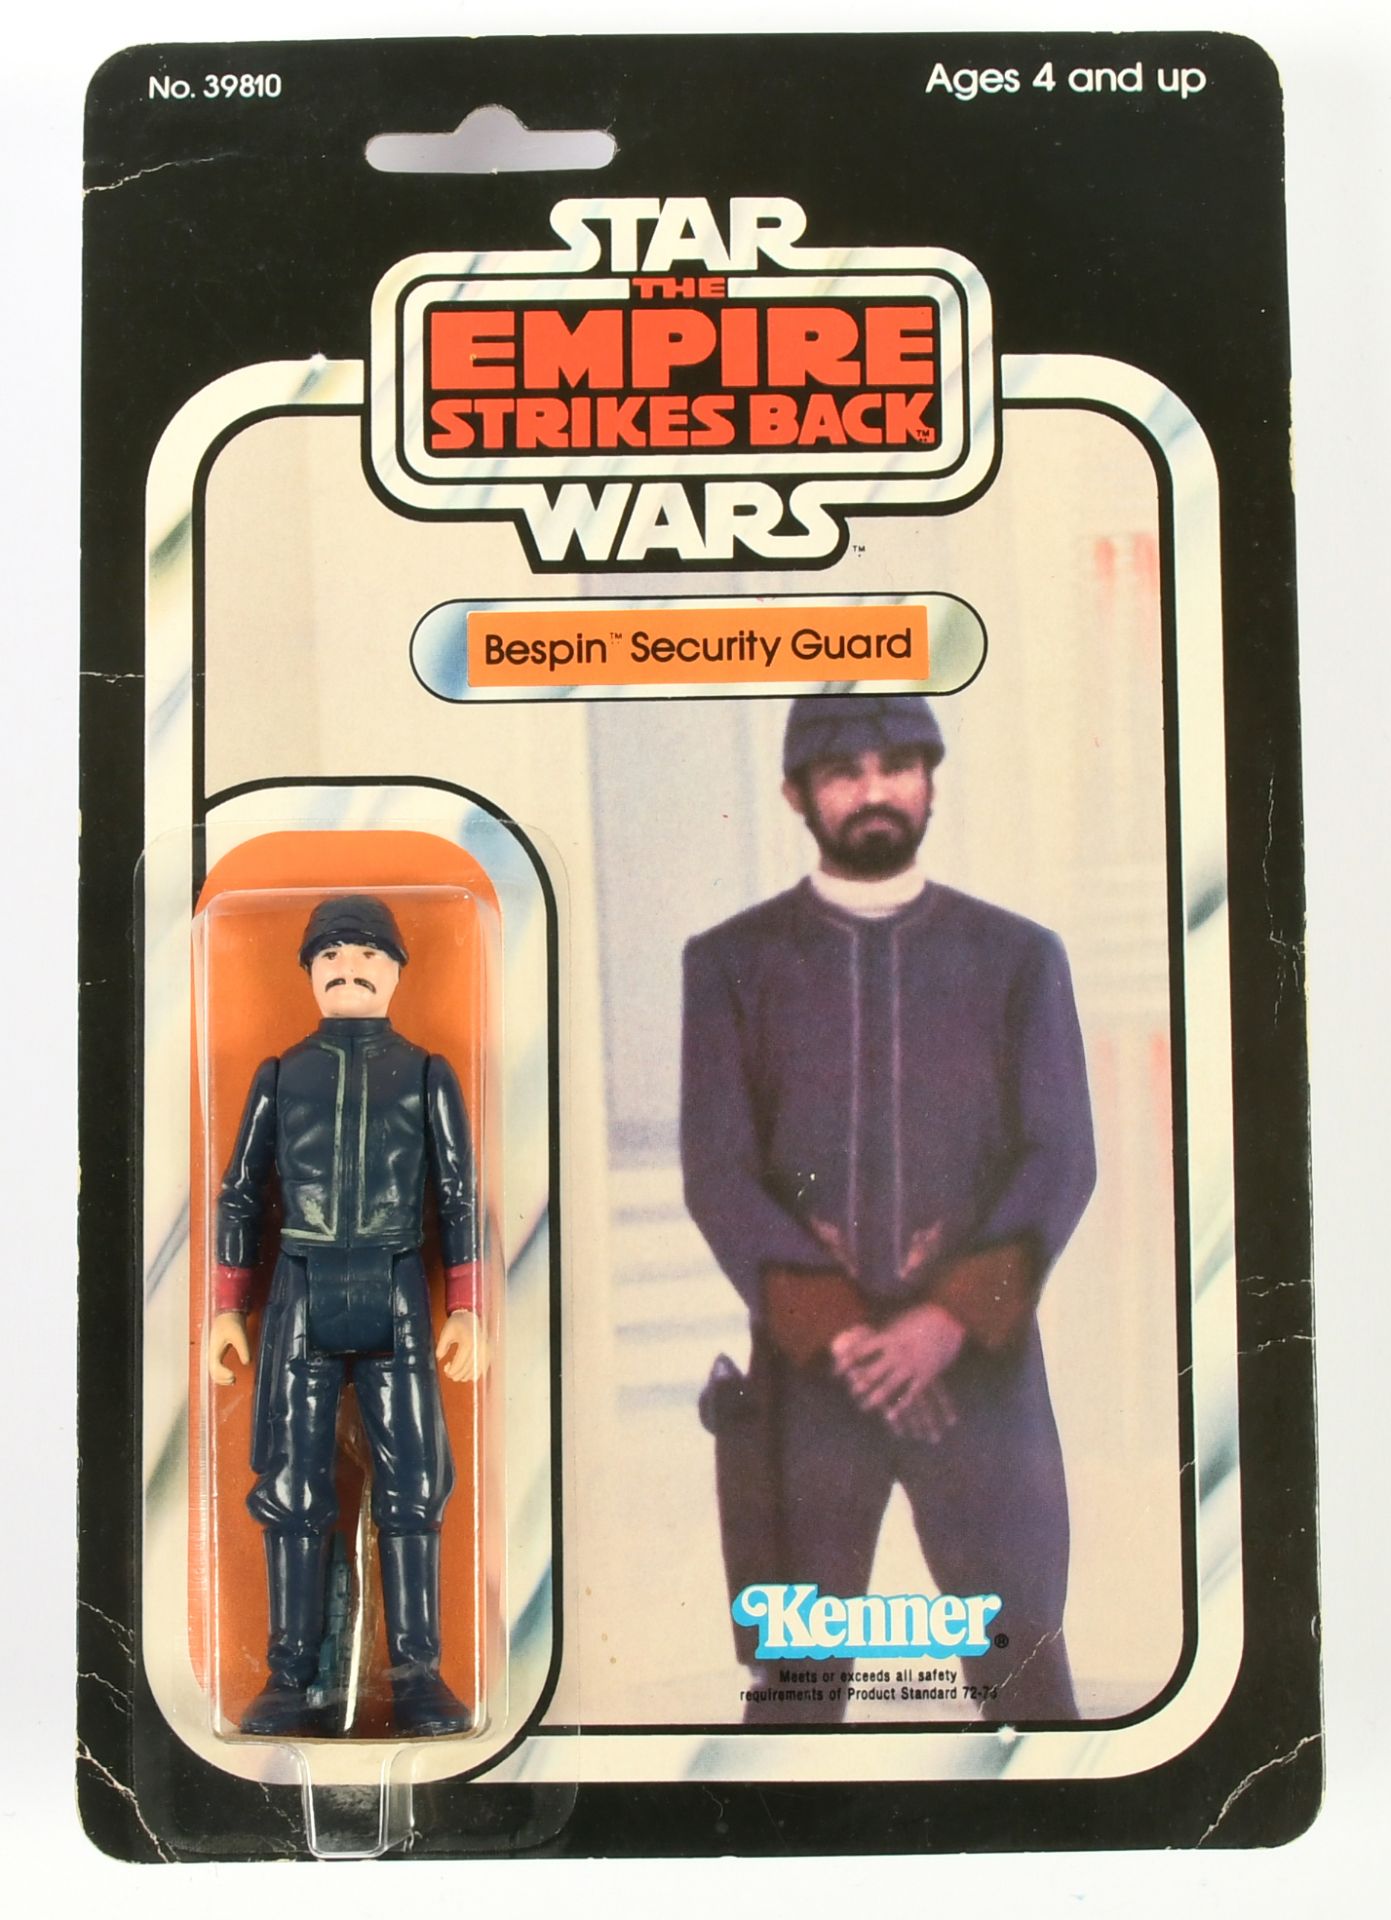 Kenner Star Wars vintage The Empire Strikes Back Bespin Guard 3 3/4" figure MOC